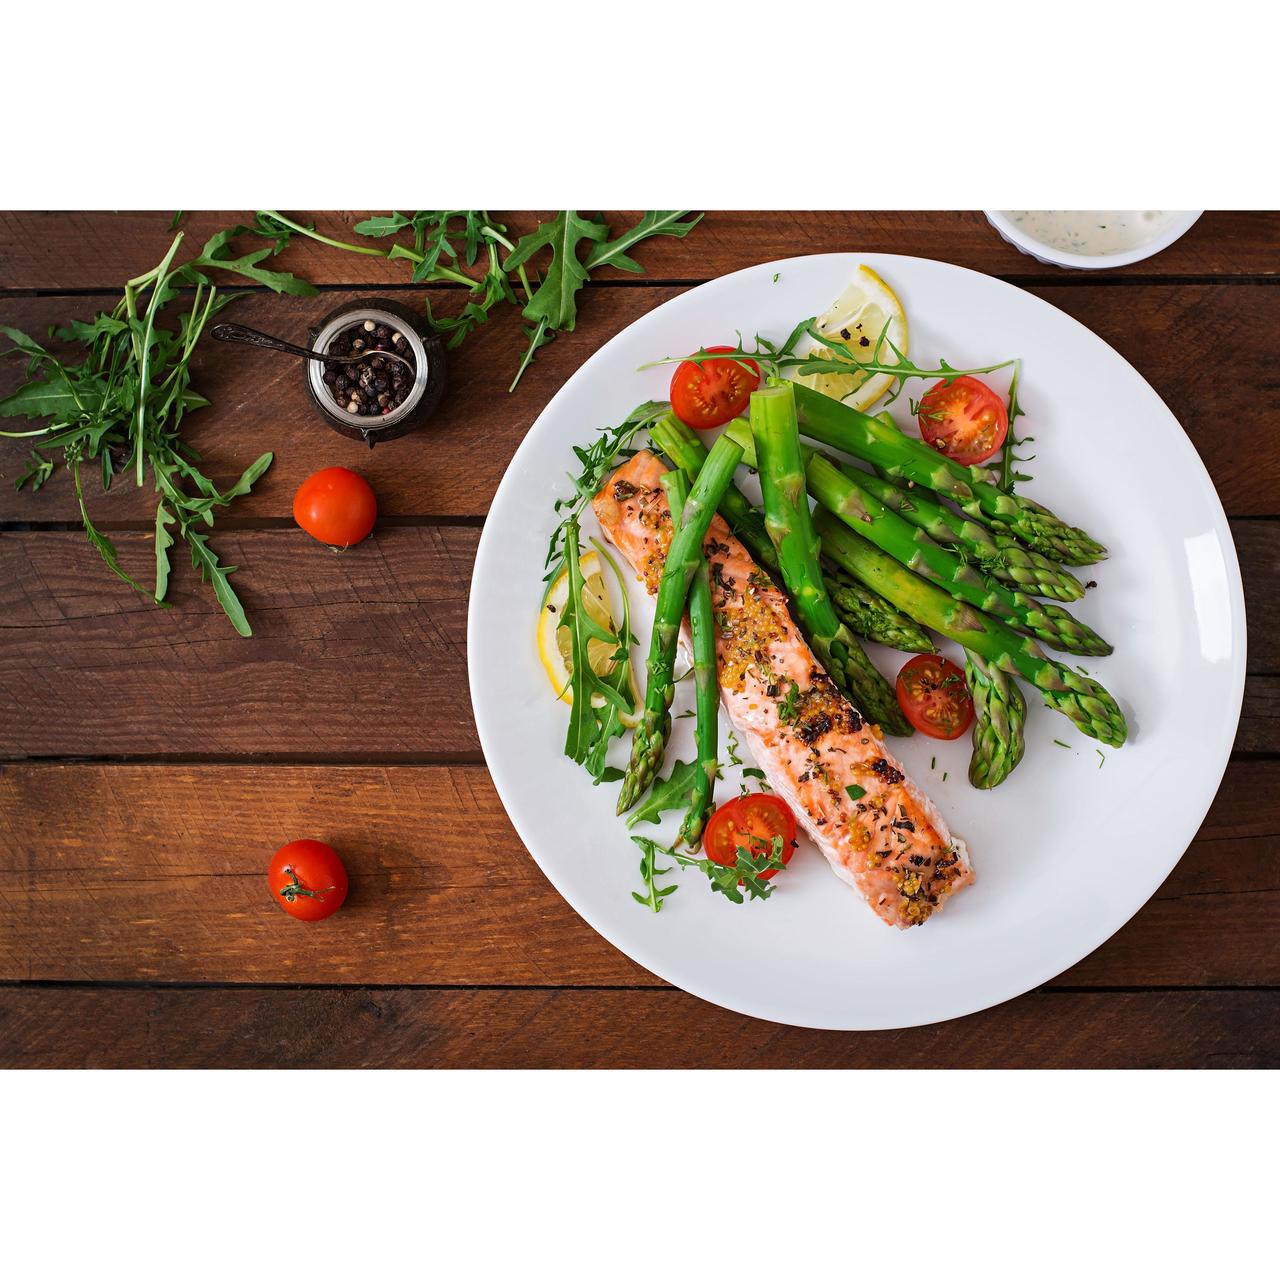 Russell's Organic Salmon Fillets 240g